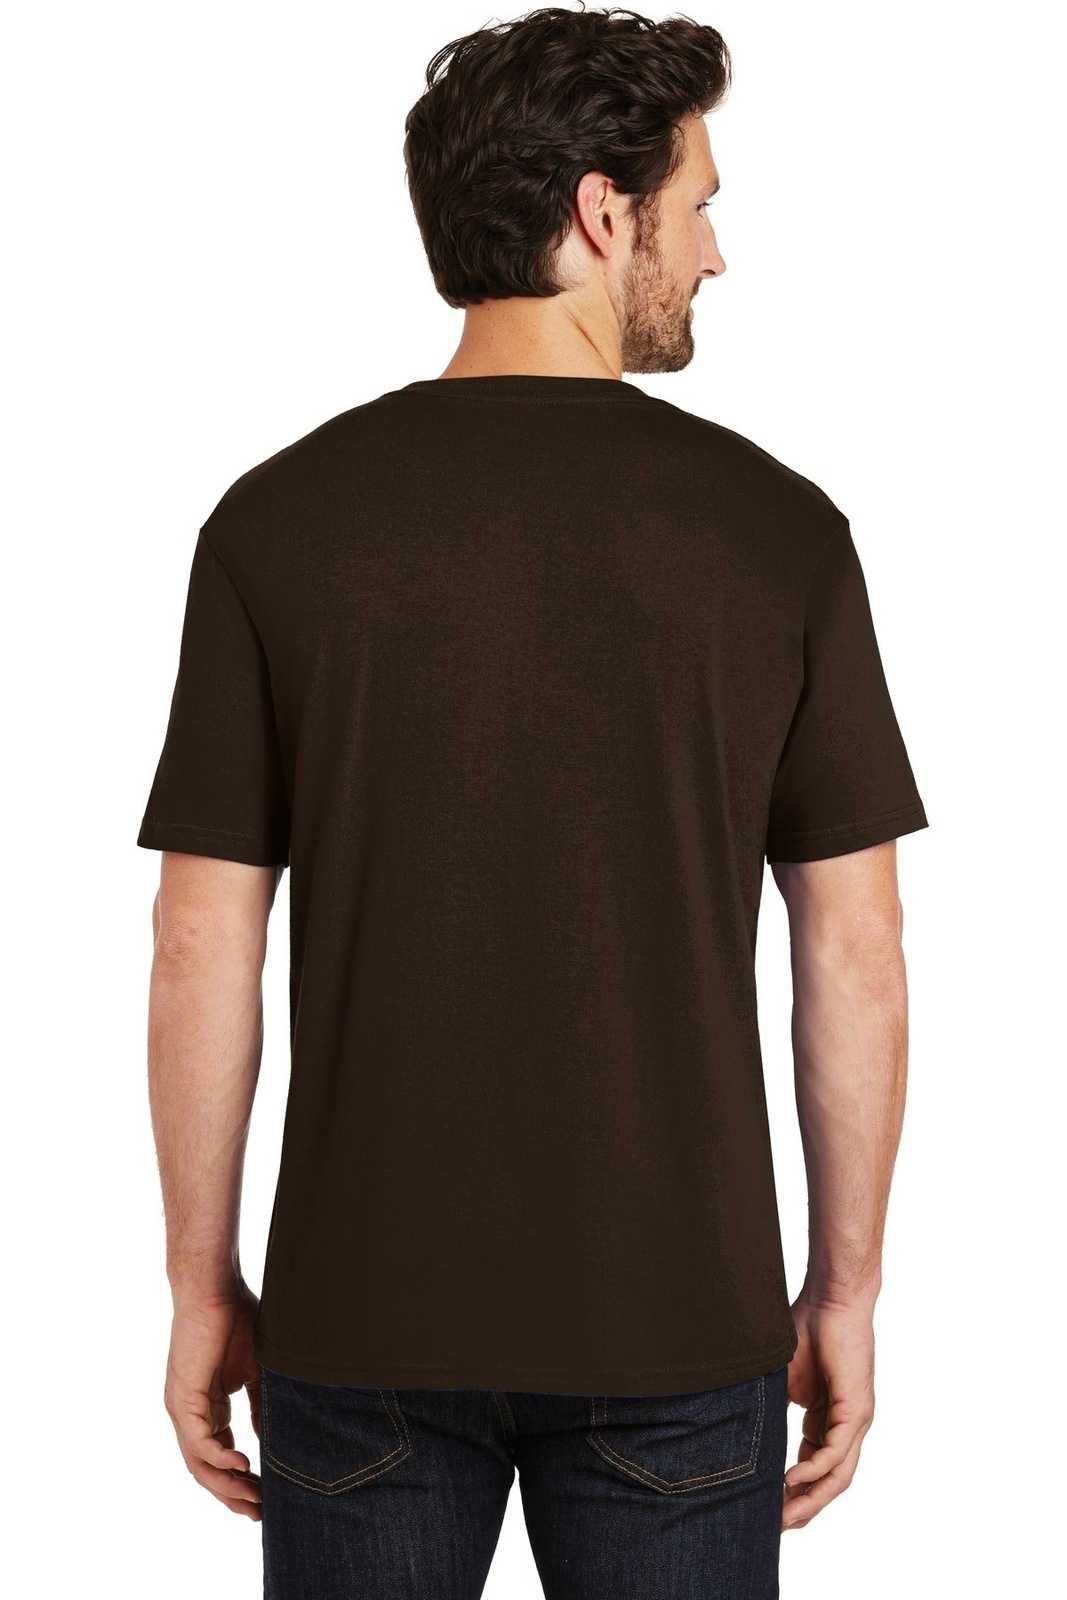 District DT104 Perfect Weight Tee - Espresso - HIT a Double - 1